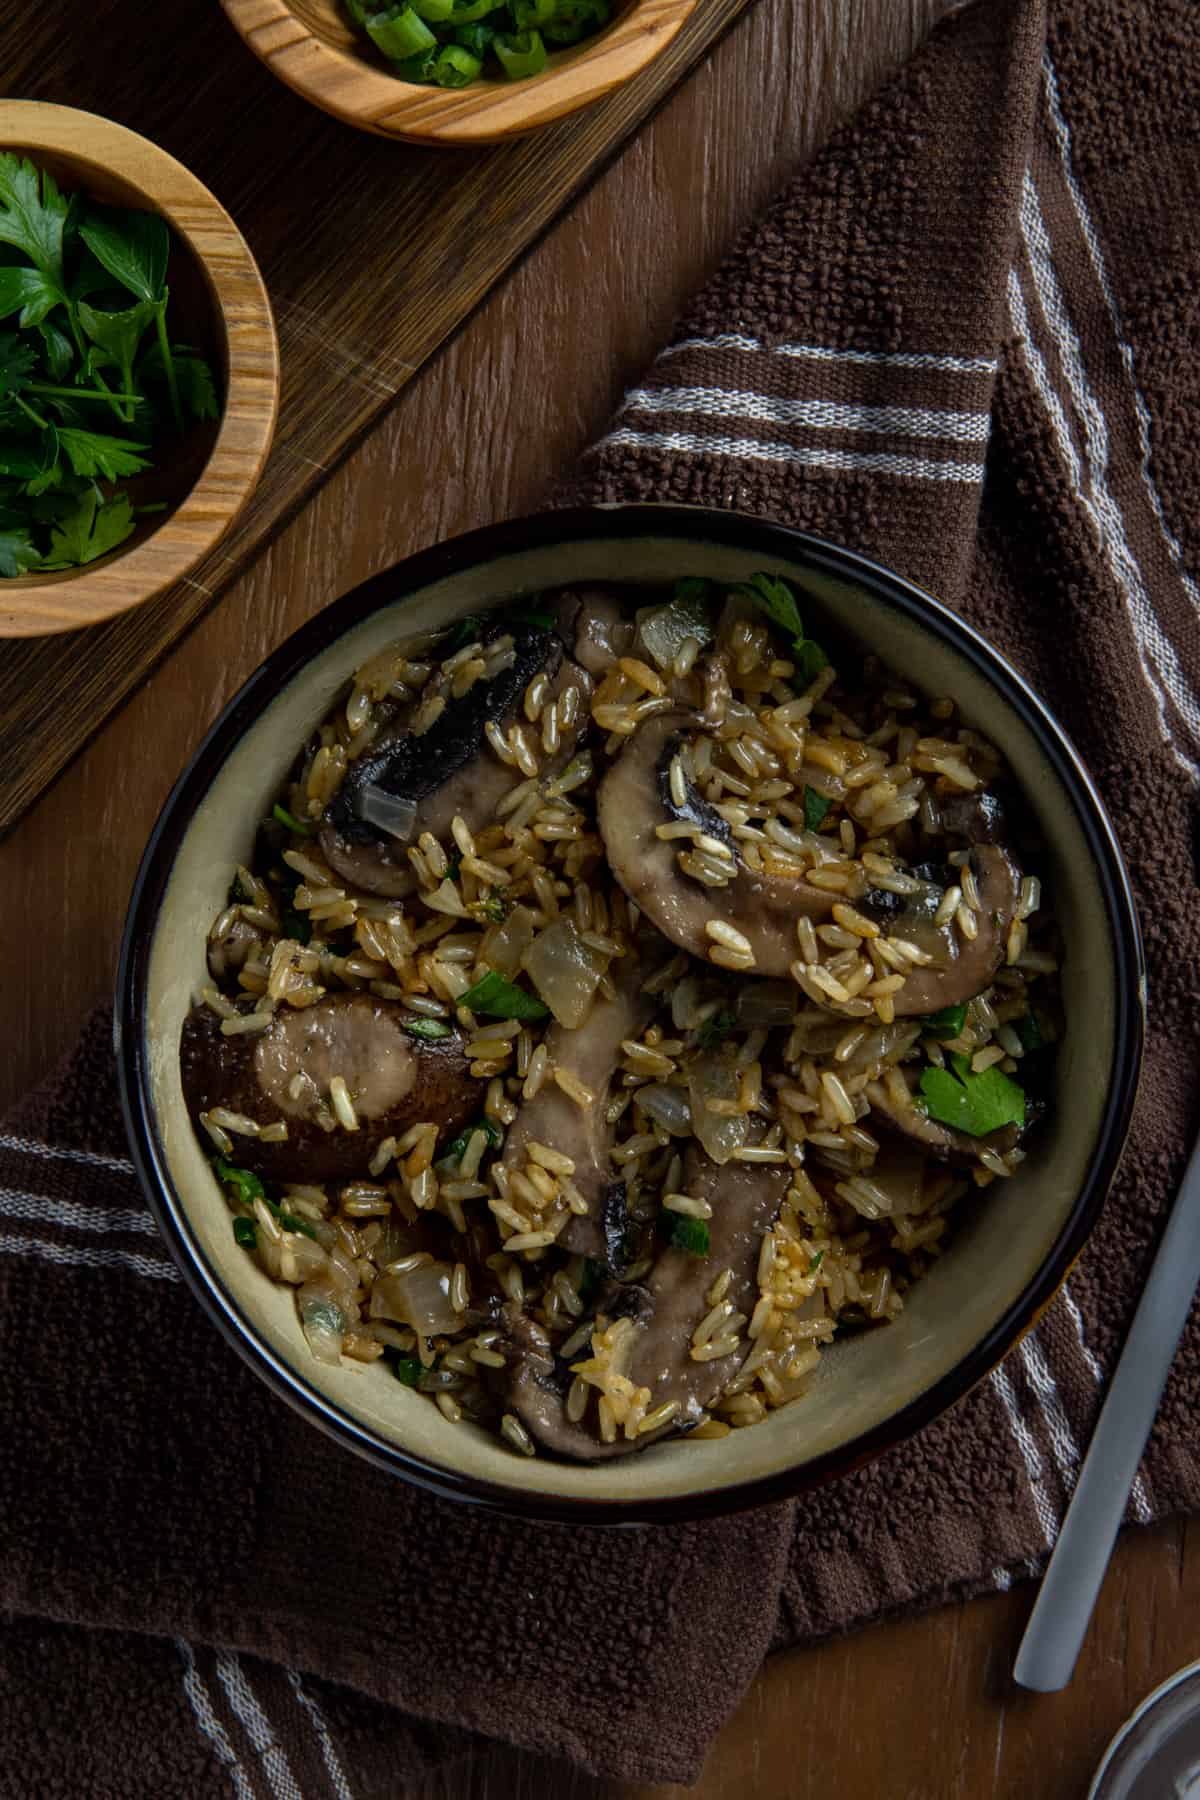 Cooked mushroom rice in brown bowl with spoon on the side.  Small bowl of sliced green onion in the background.